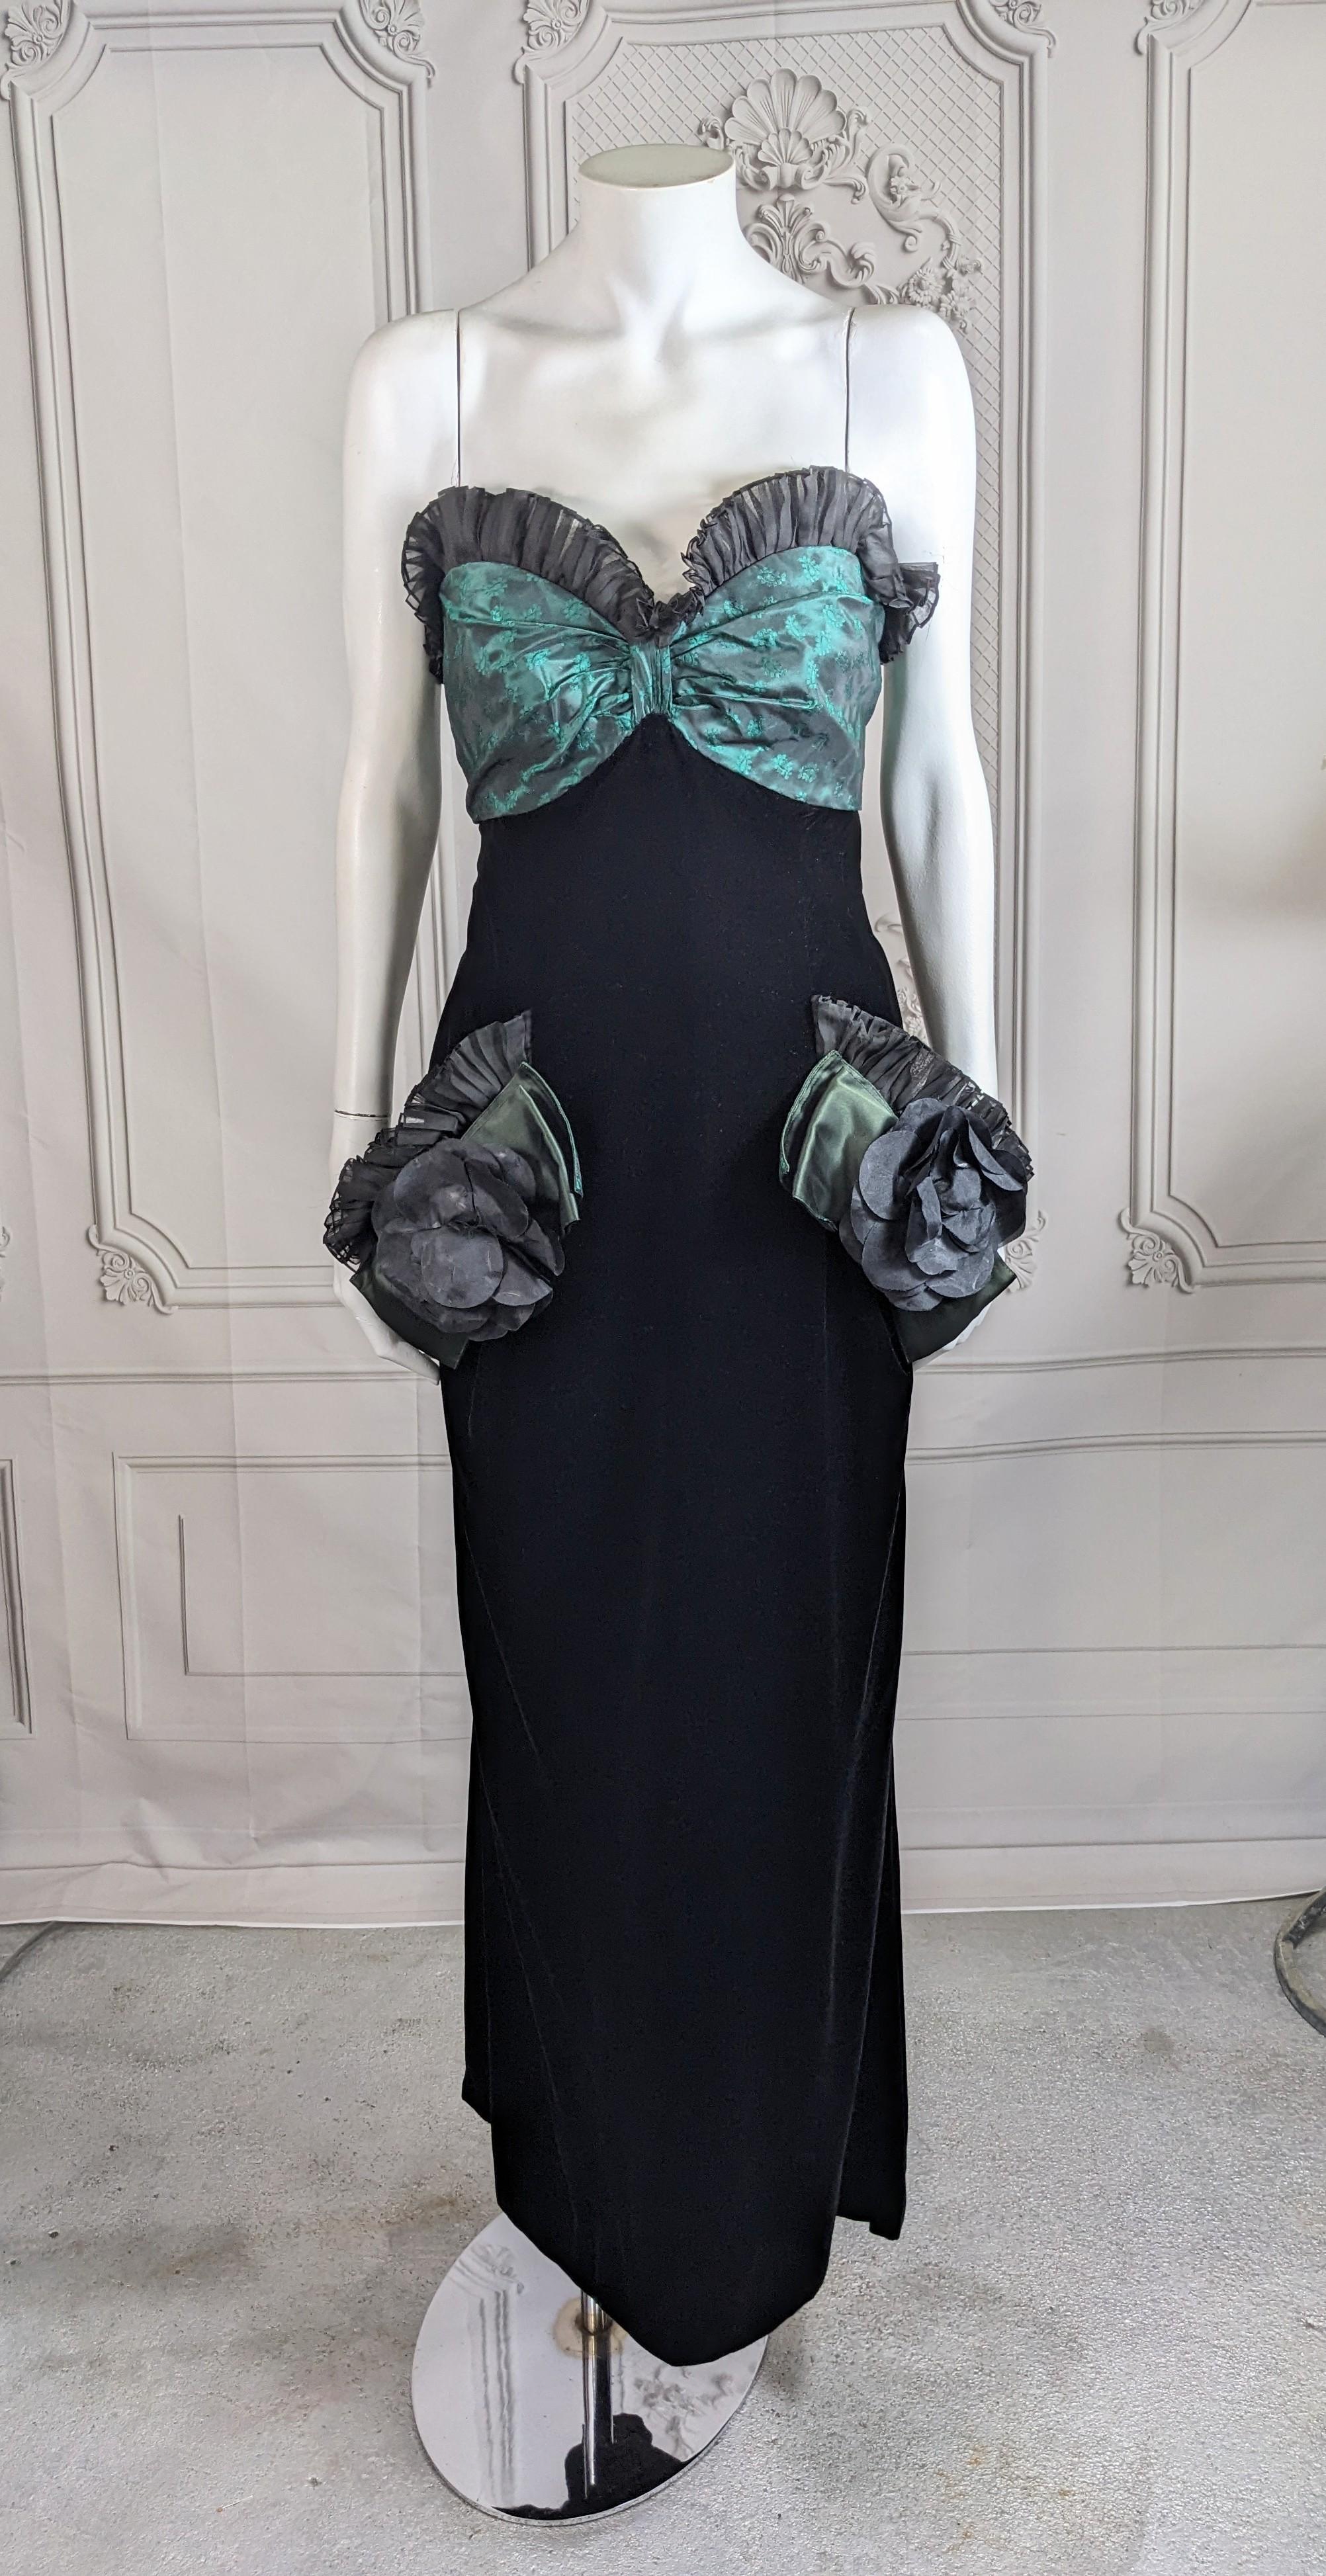 Elegant Nina Ricci Strapless Velvet Organza Brocade Column Gown from the 1980's.  Velvet column with green brocade ruching trimmed in pleated organza. The faux pockets are trimmed with taffeta bows and silk flowers as well. Has interior boning